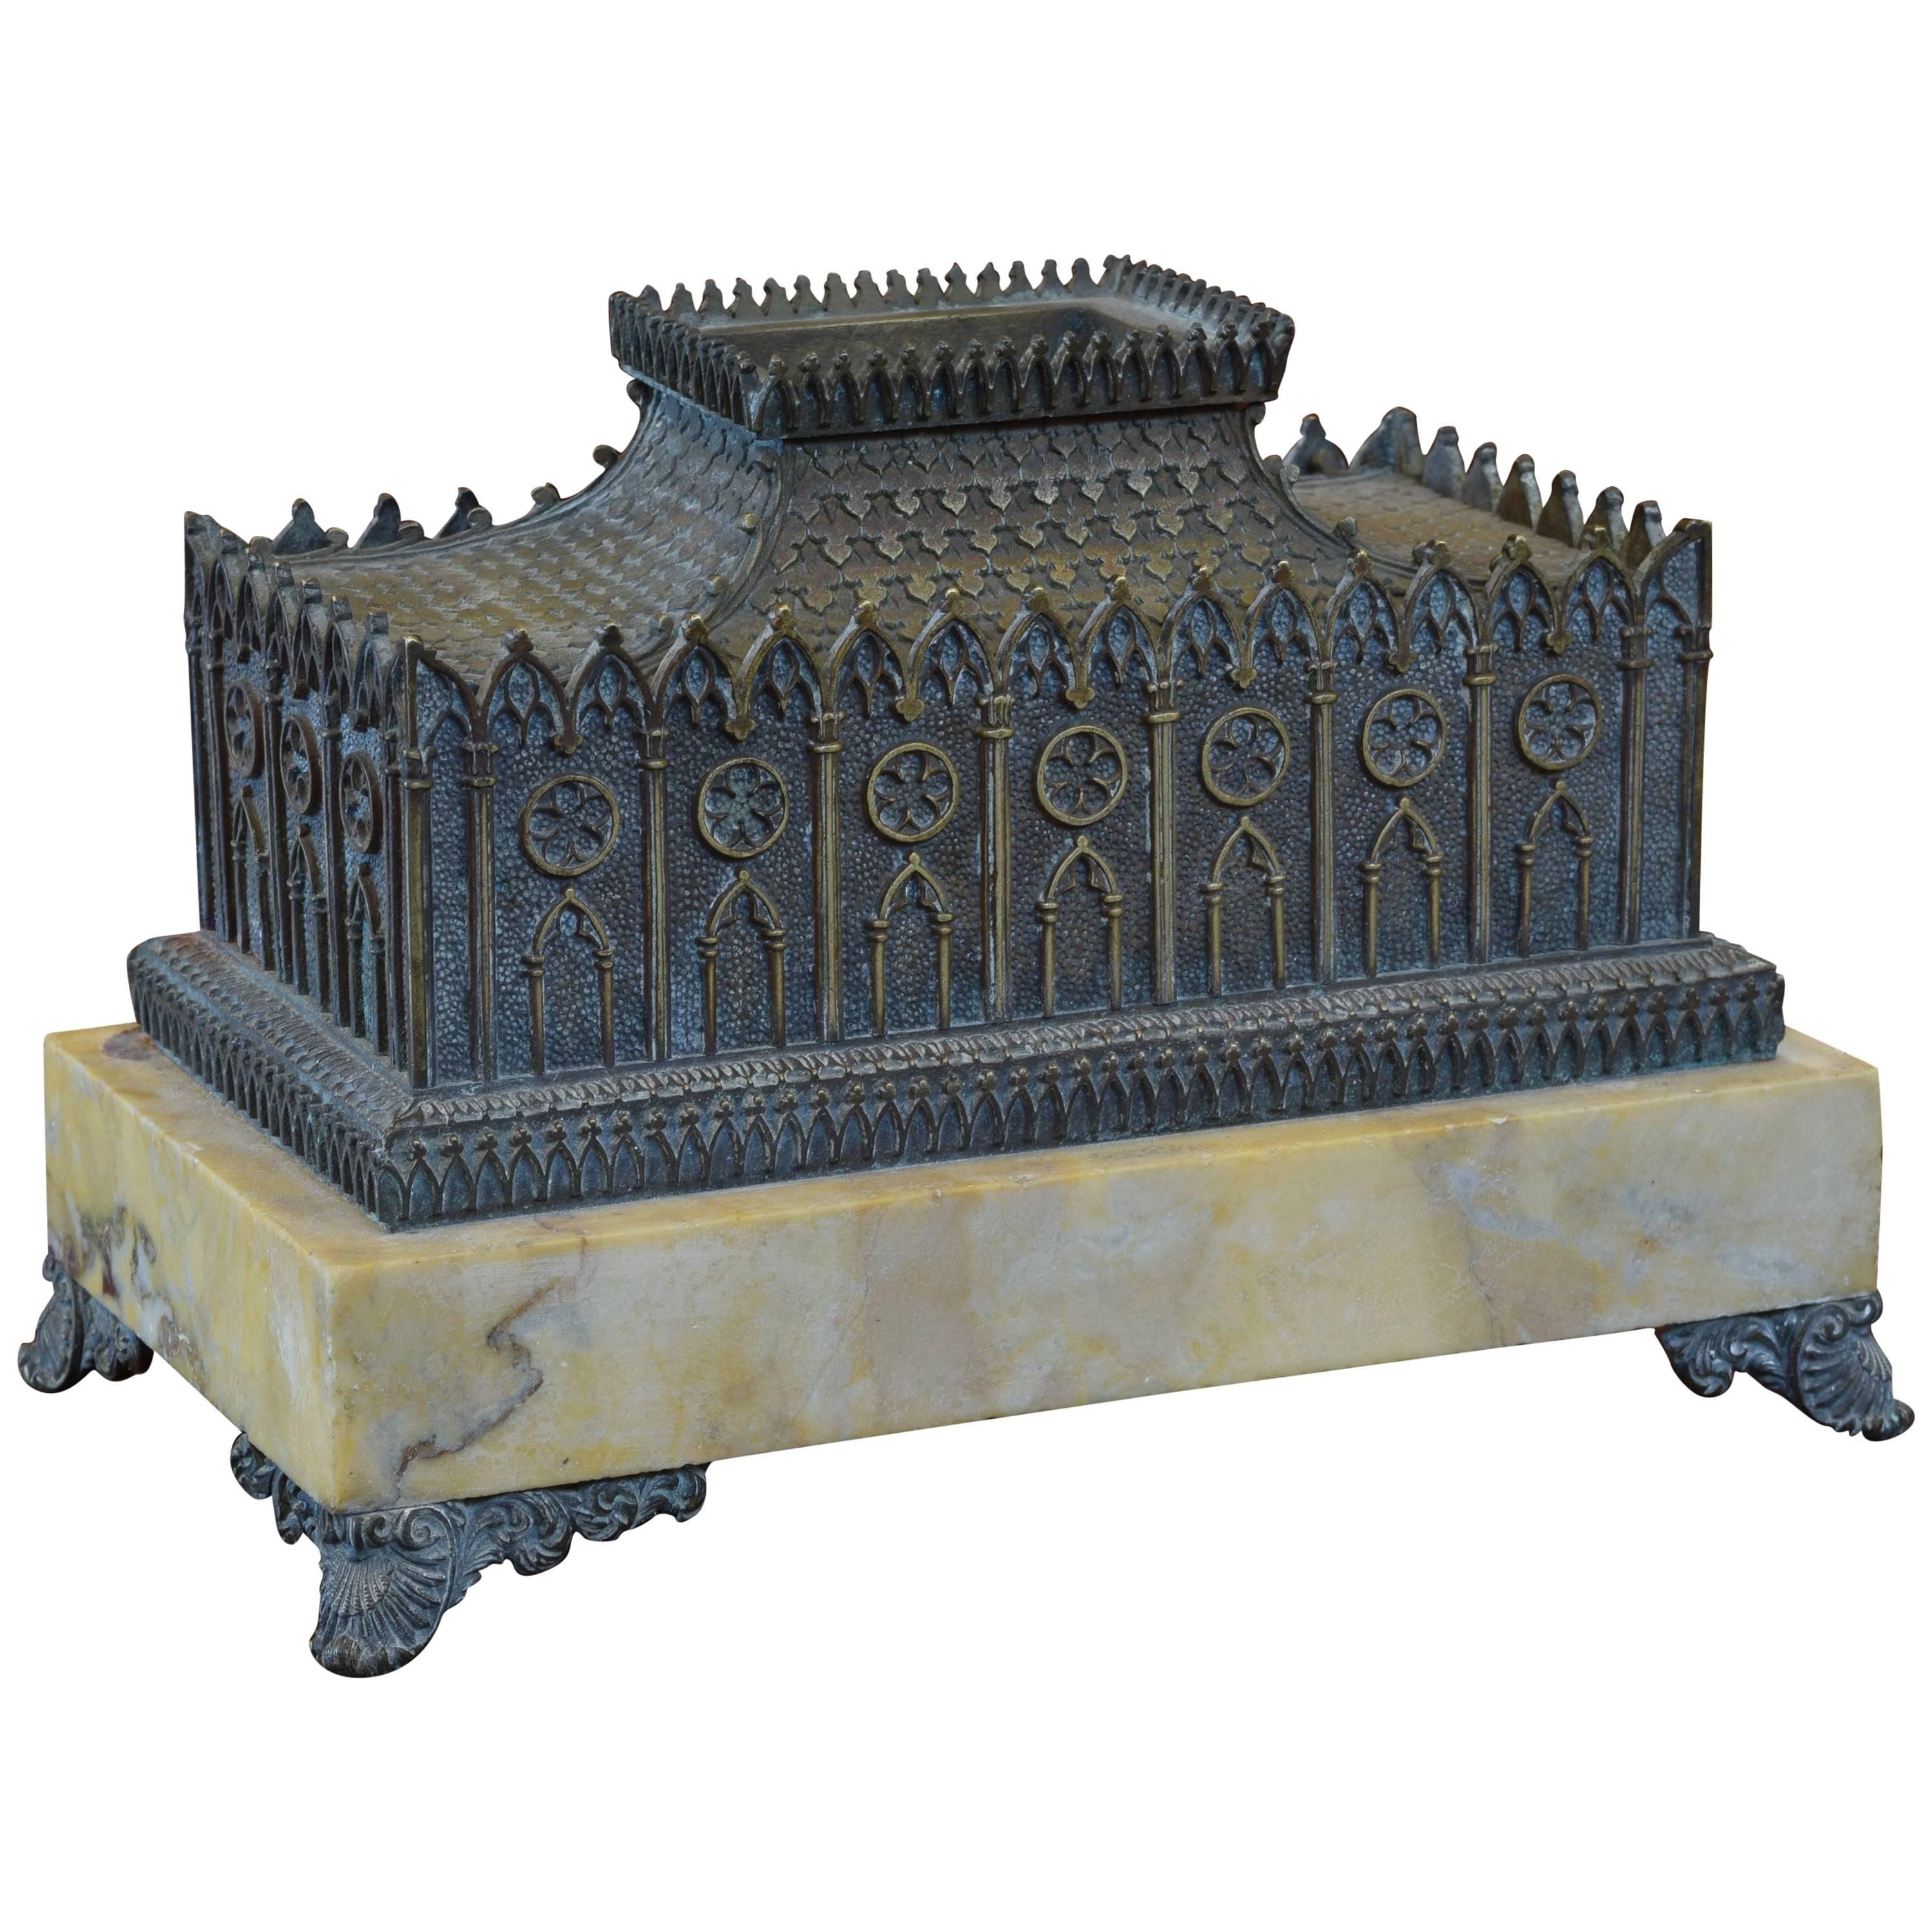 Italian Patinated Brass and Marble Architectural Model Inkwell, circa 1875